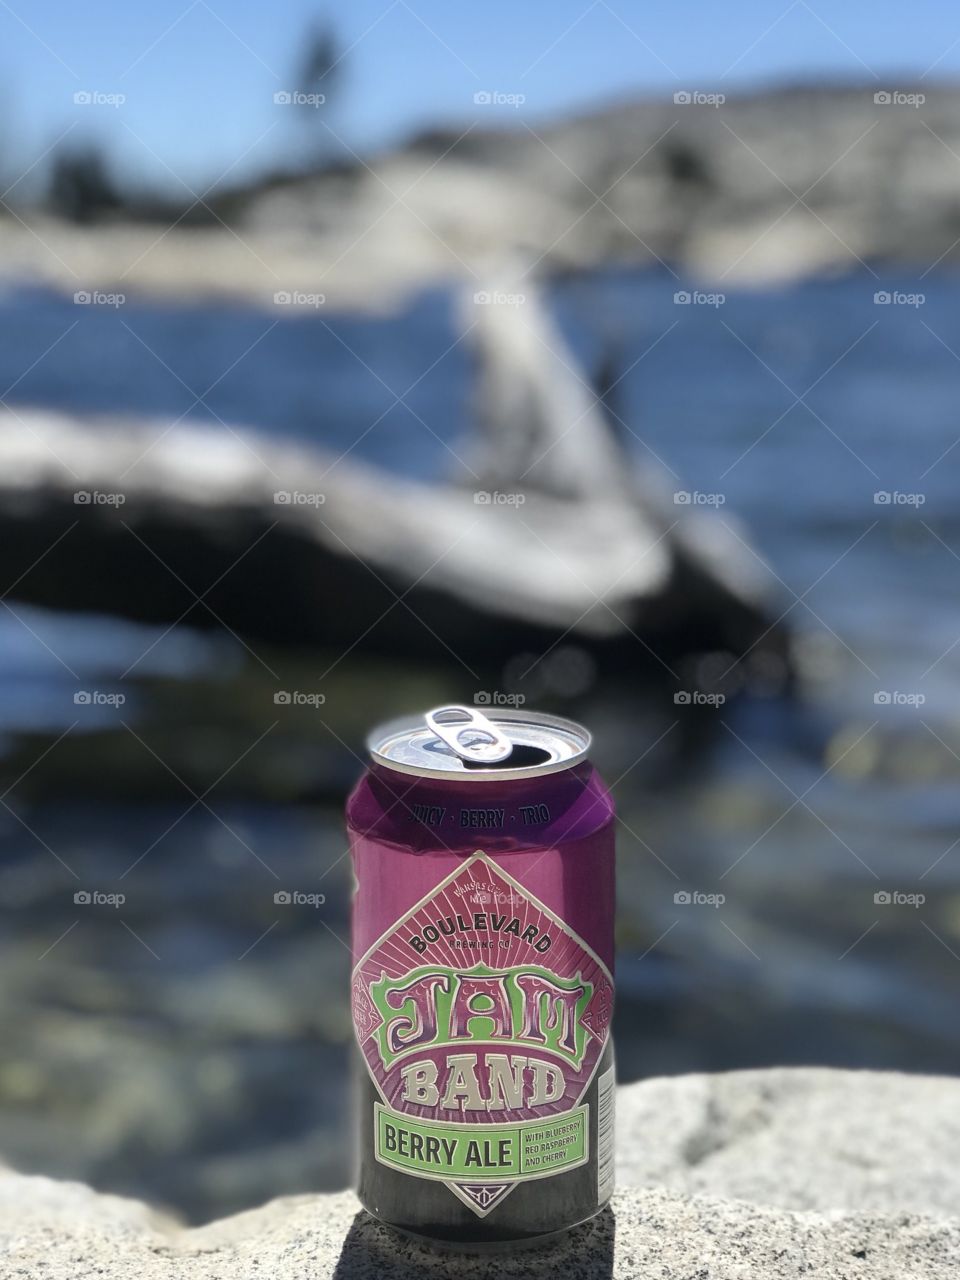 Getting to your destination is always made better with an ice cold beer at the top. 